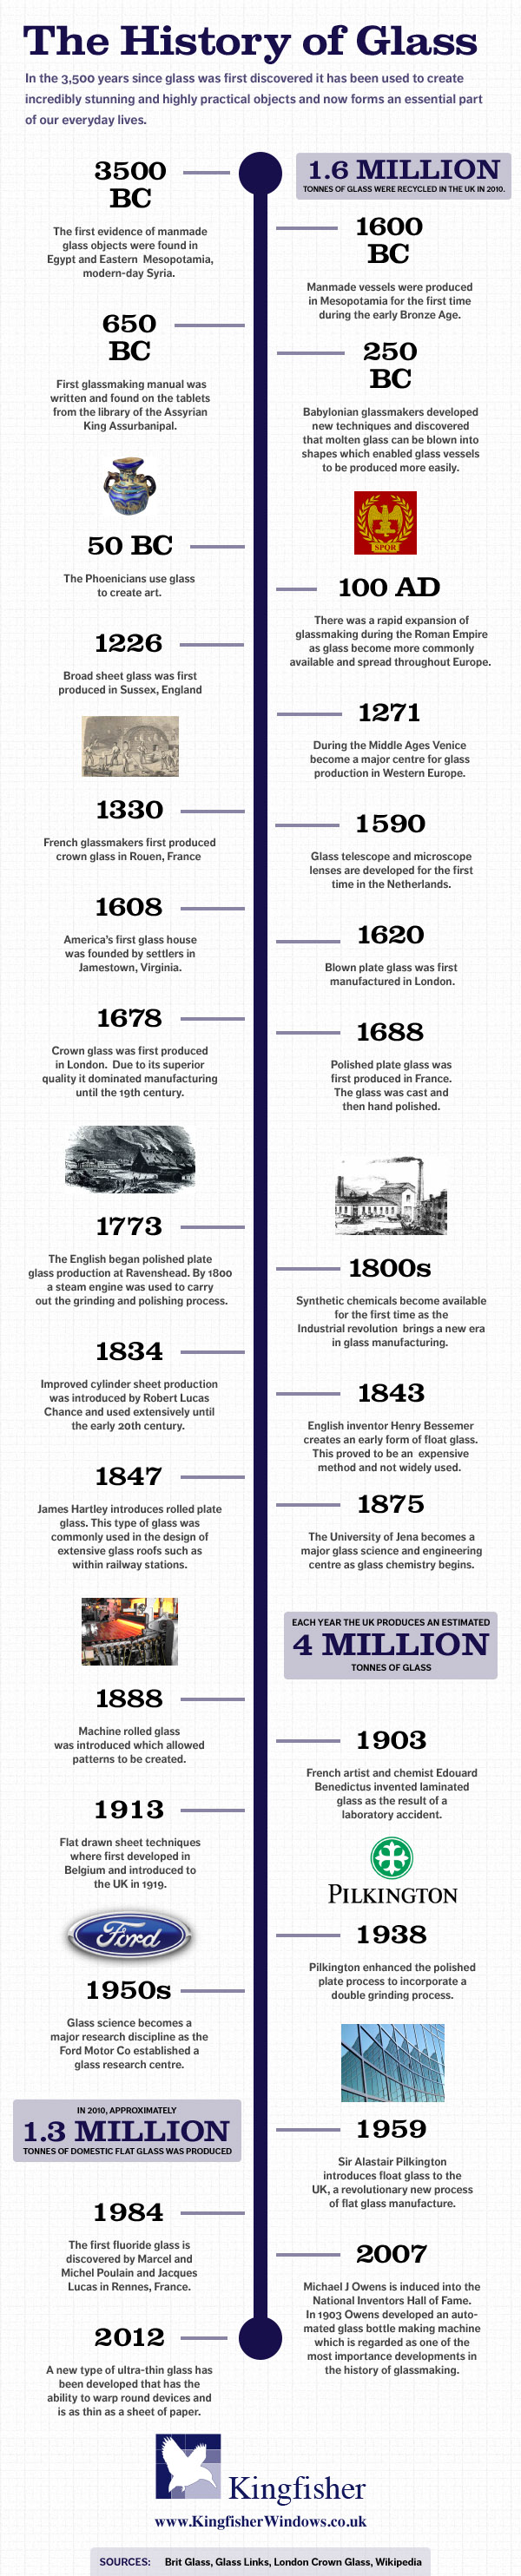 The history of glass